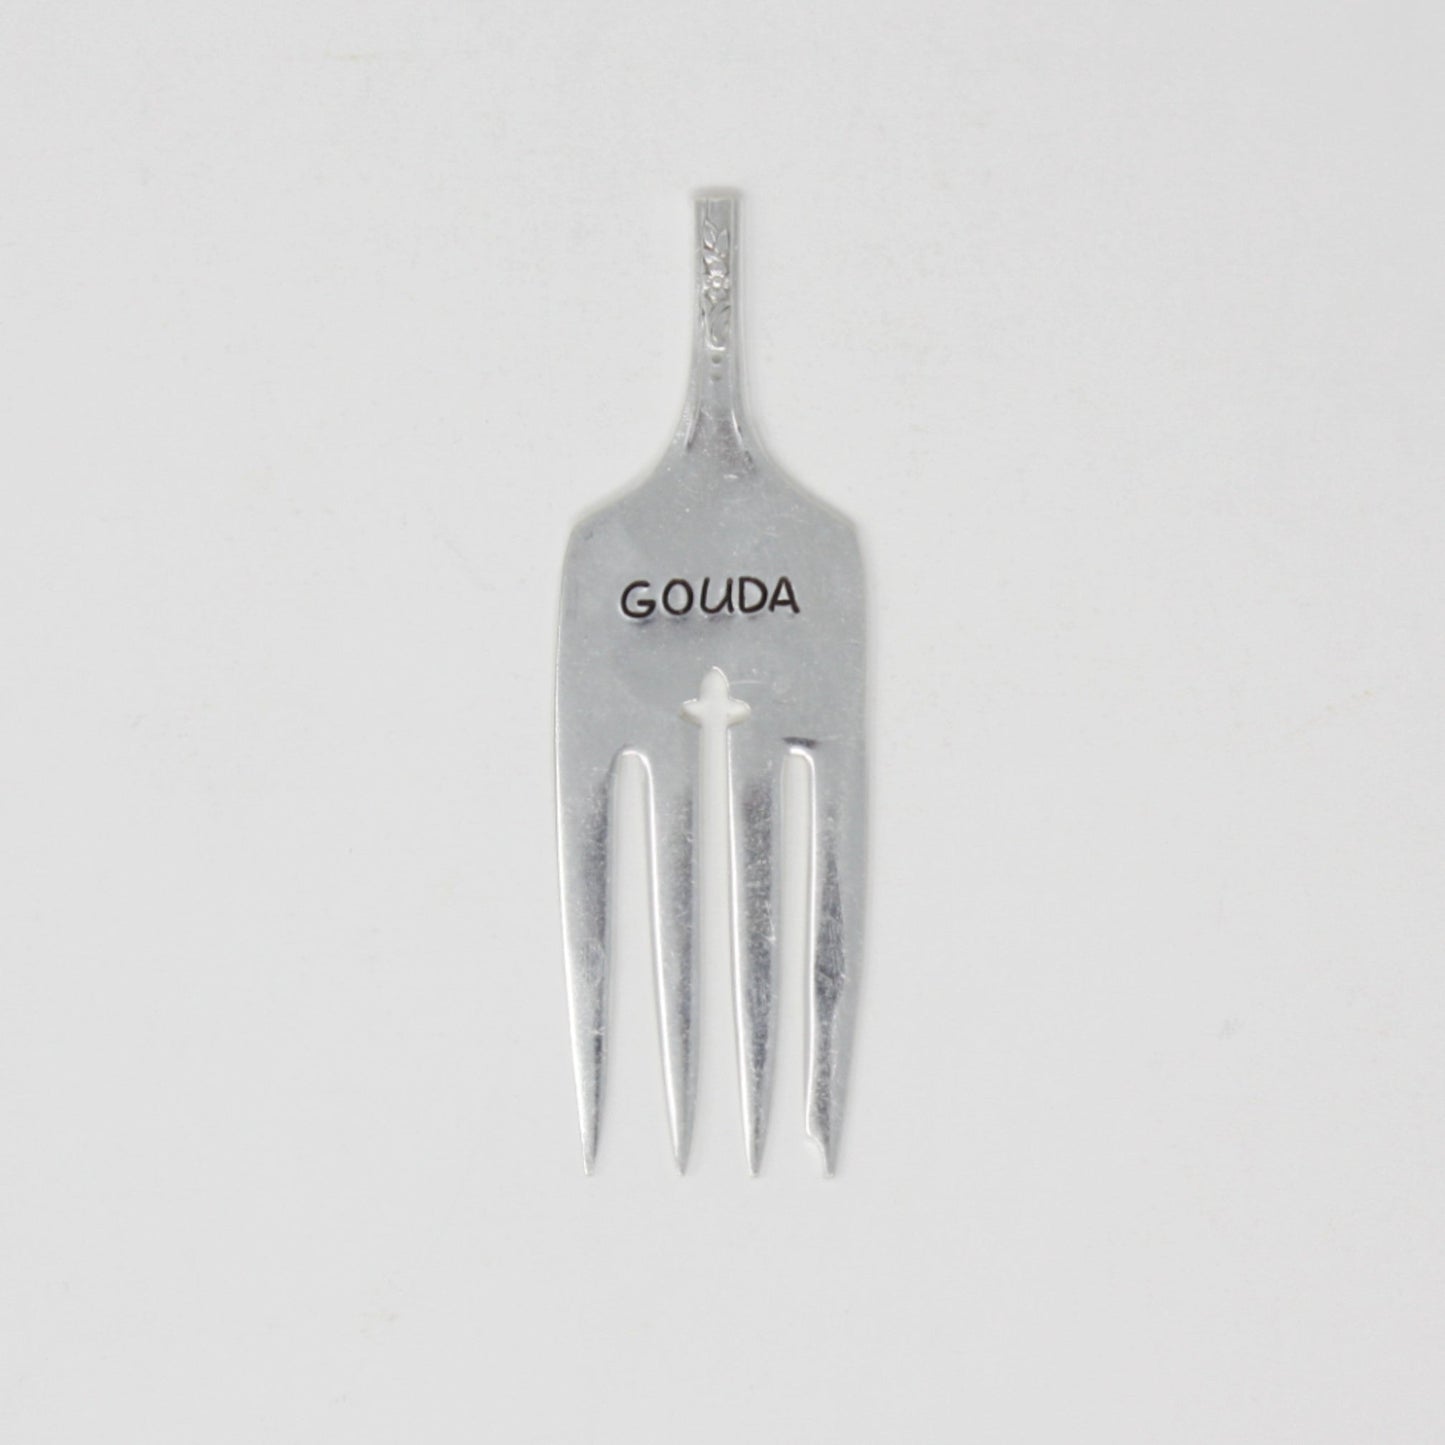 Vintage Fork Cheese Markers  Set - "Cheddar" "Gouda" "Jack" and "Swiss" - Made in the USA